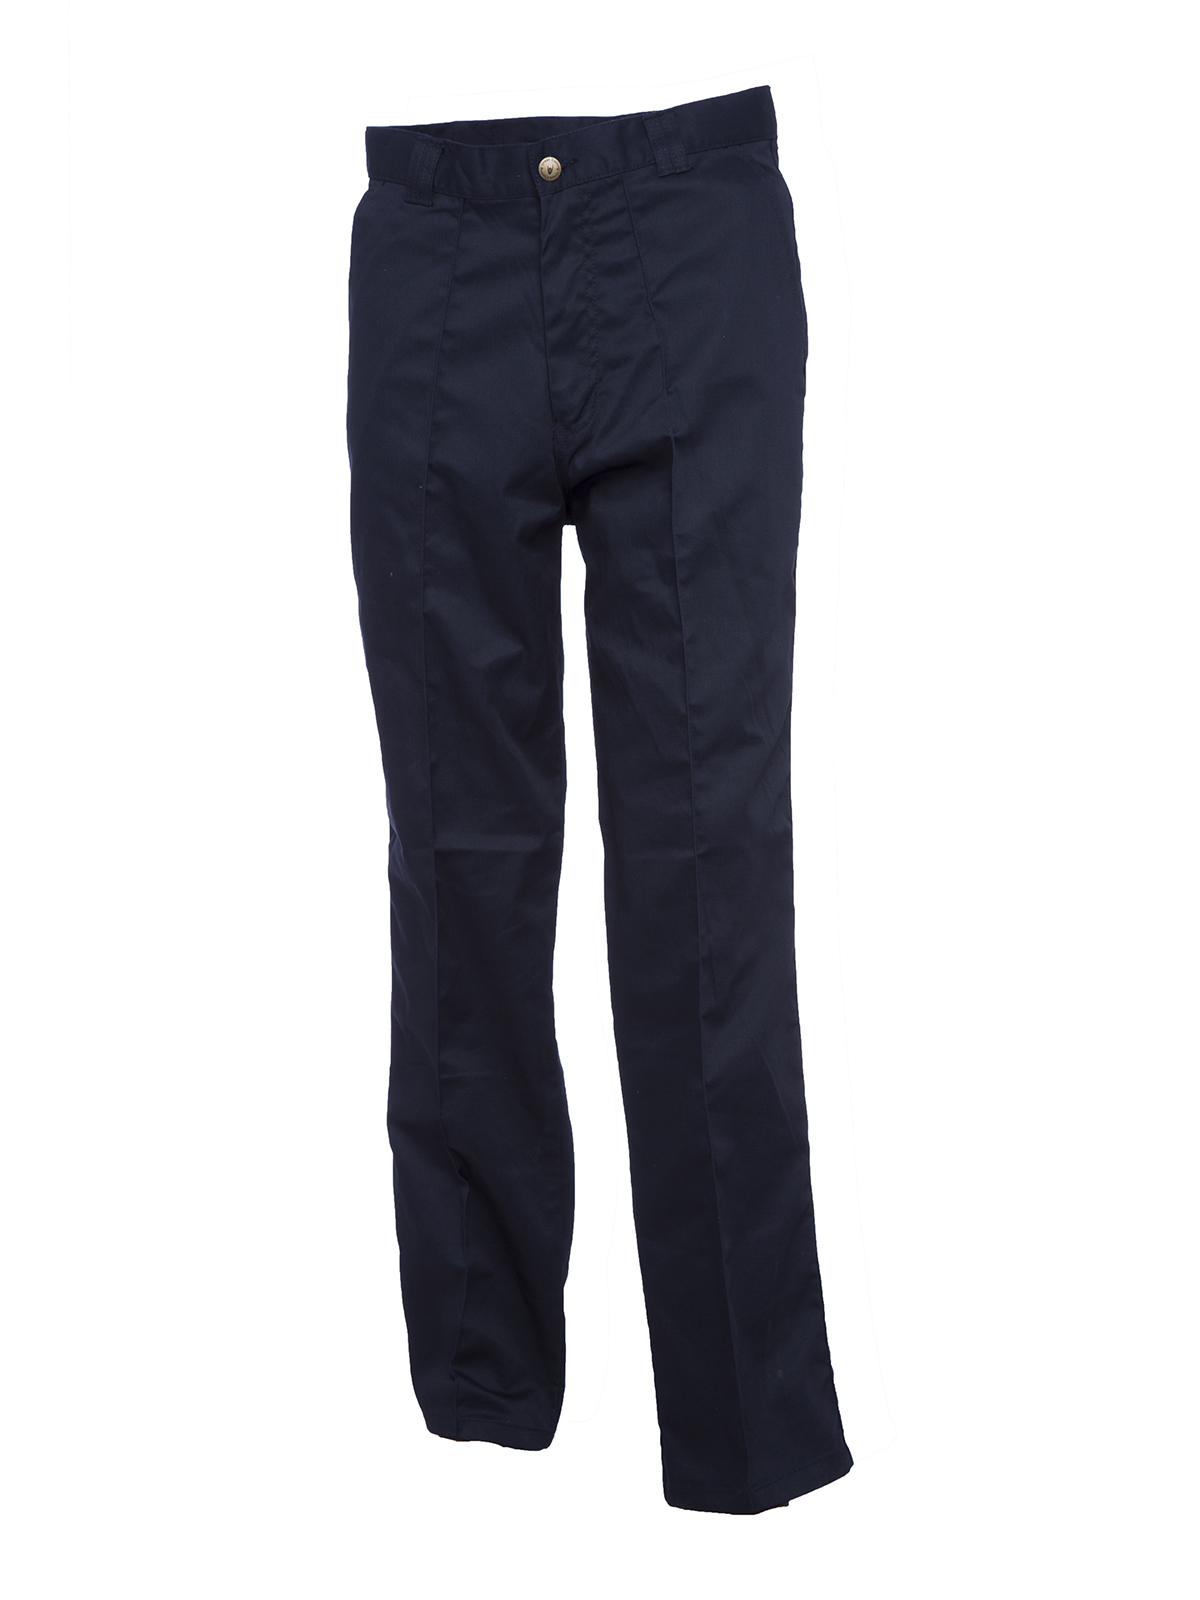 Workwear Trousers, Navy Blue - 44R